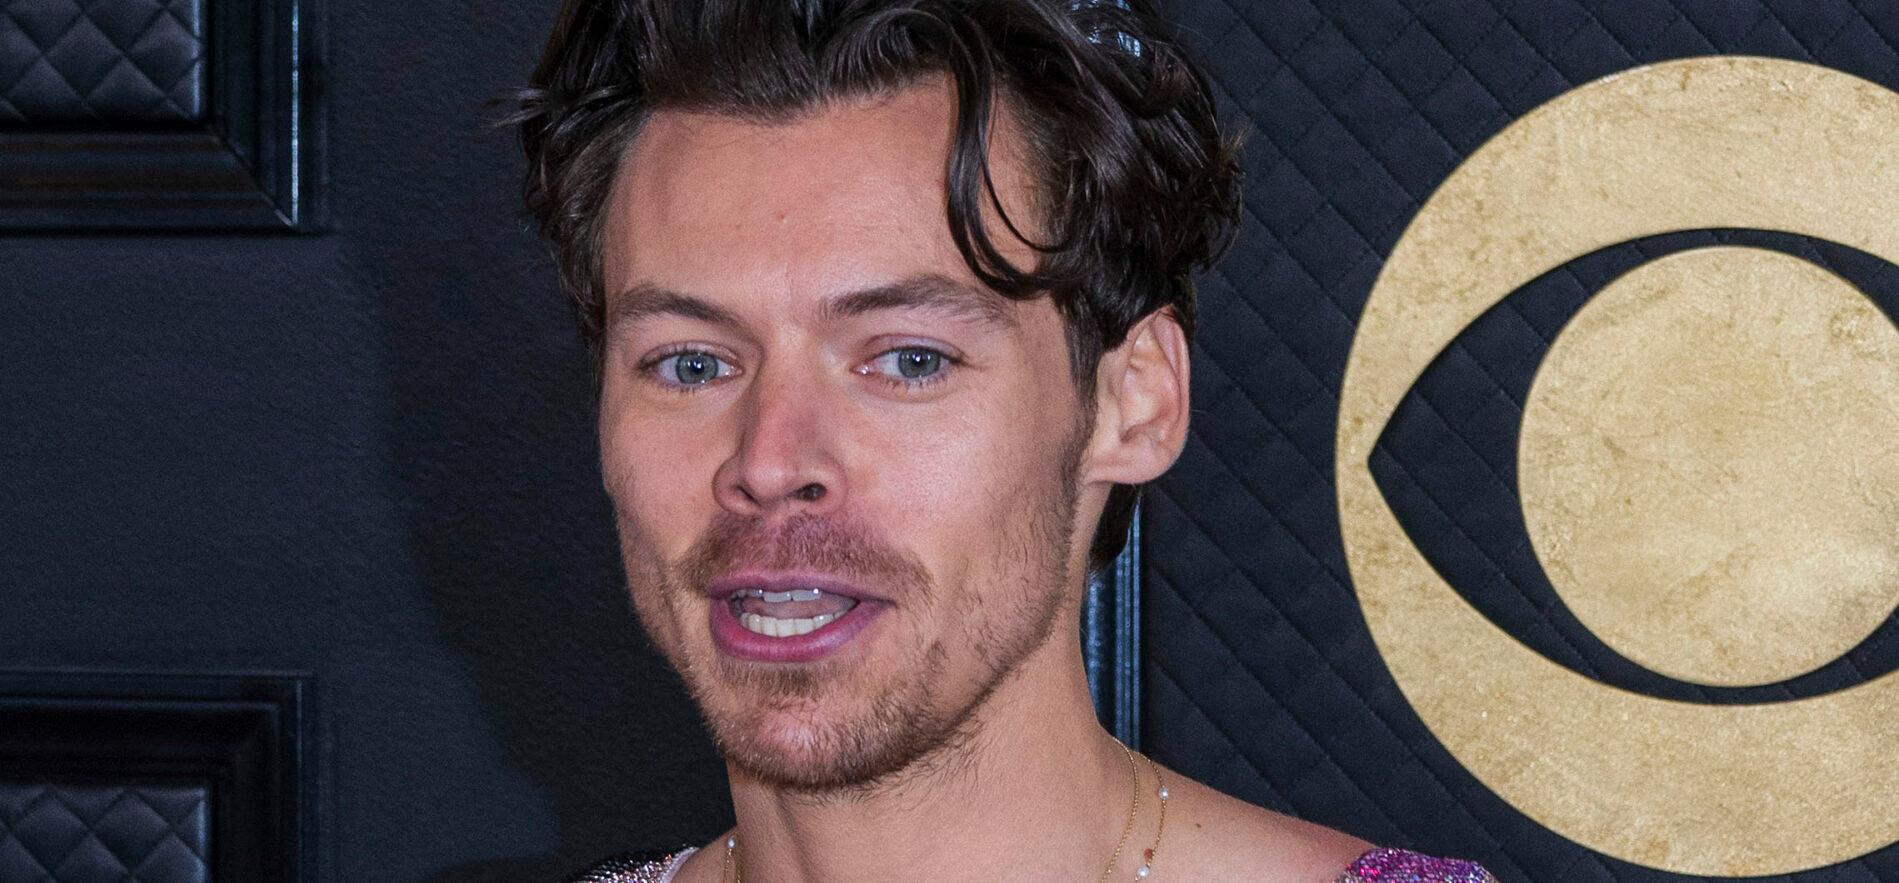 Harry Styles Claims He’s ‘Very Aware’ Of His ‘Privilege’ Following Grammy Speech Backlash